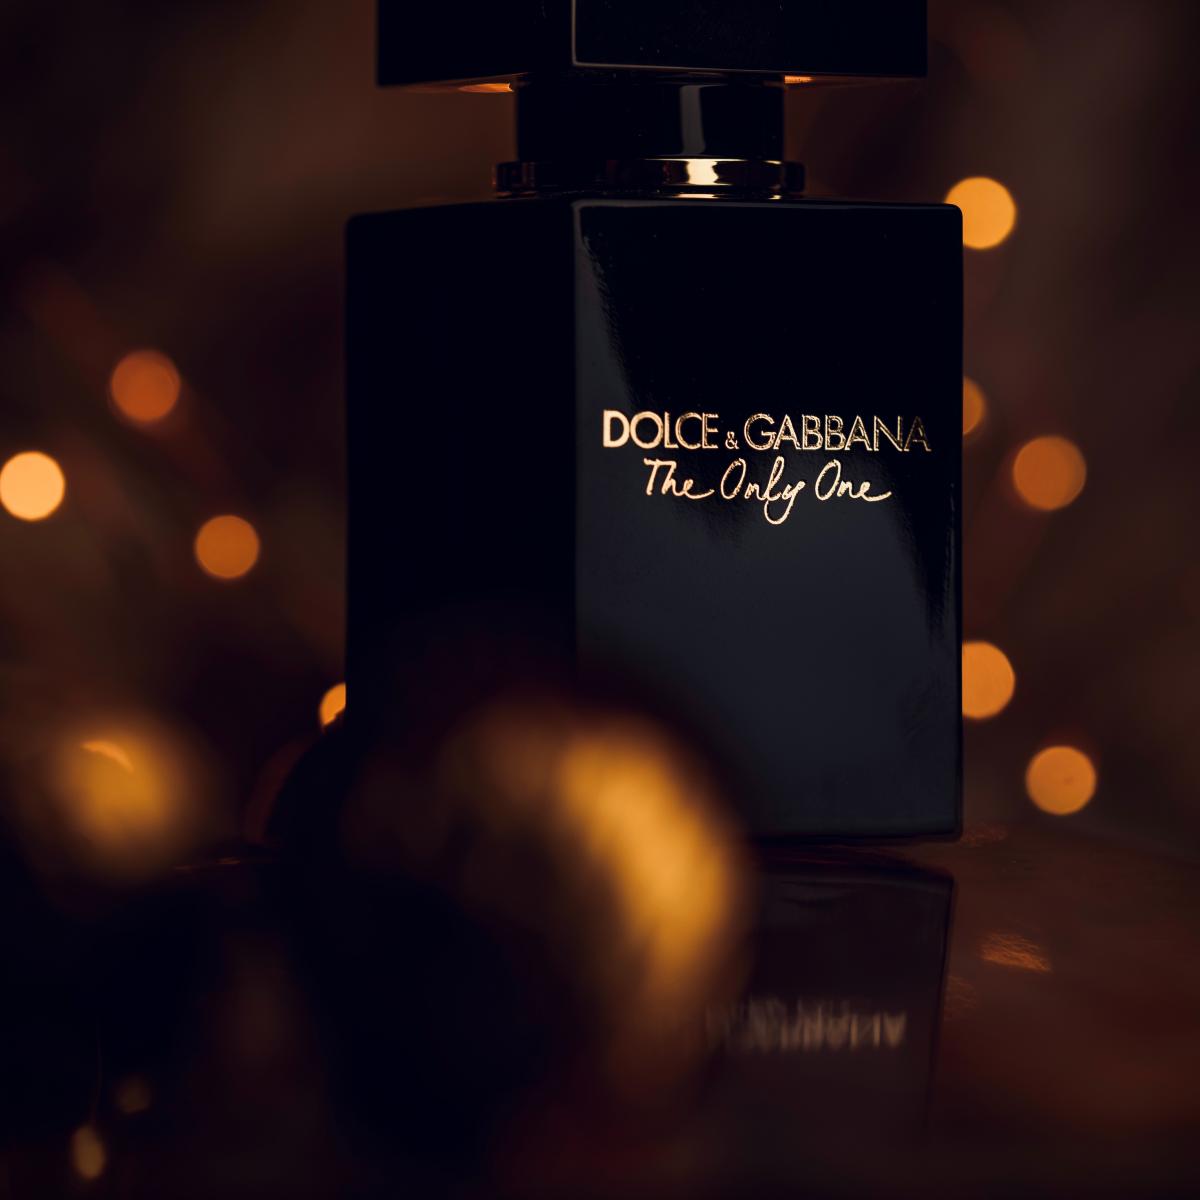 The only one intense dolce. Dolce Gabbana the only one intense женские. The one intense Dolce Gabbana для женщин. The only one Eau de Parfum intense Dolce&Gabbana. Дольче Габбана Парфюм Интенс женские.